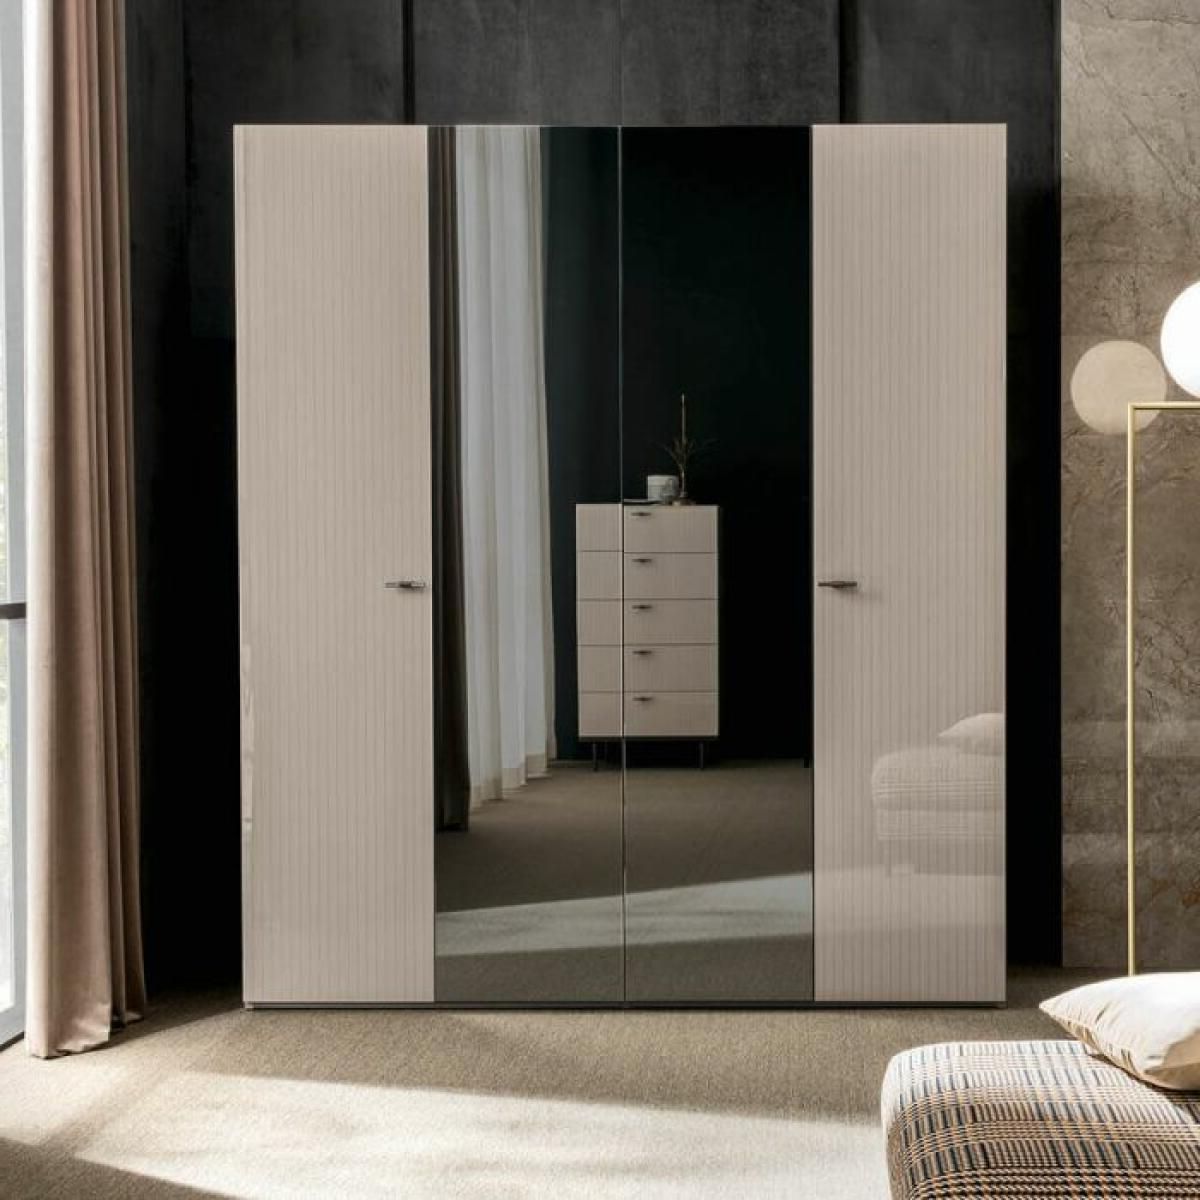 Claire 4 Door High Gloss Mirror Wardrobe – Bova Contemporary Furniture –  Dallas, Texas Modern Furniture Store Throughout High Gloss White Wardrobes (View 13 of 20)